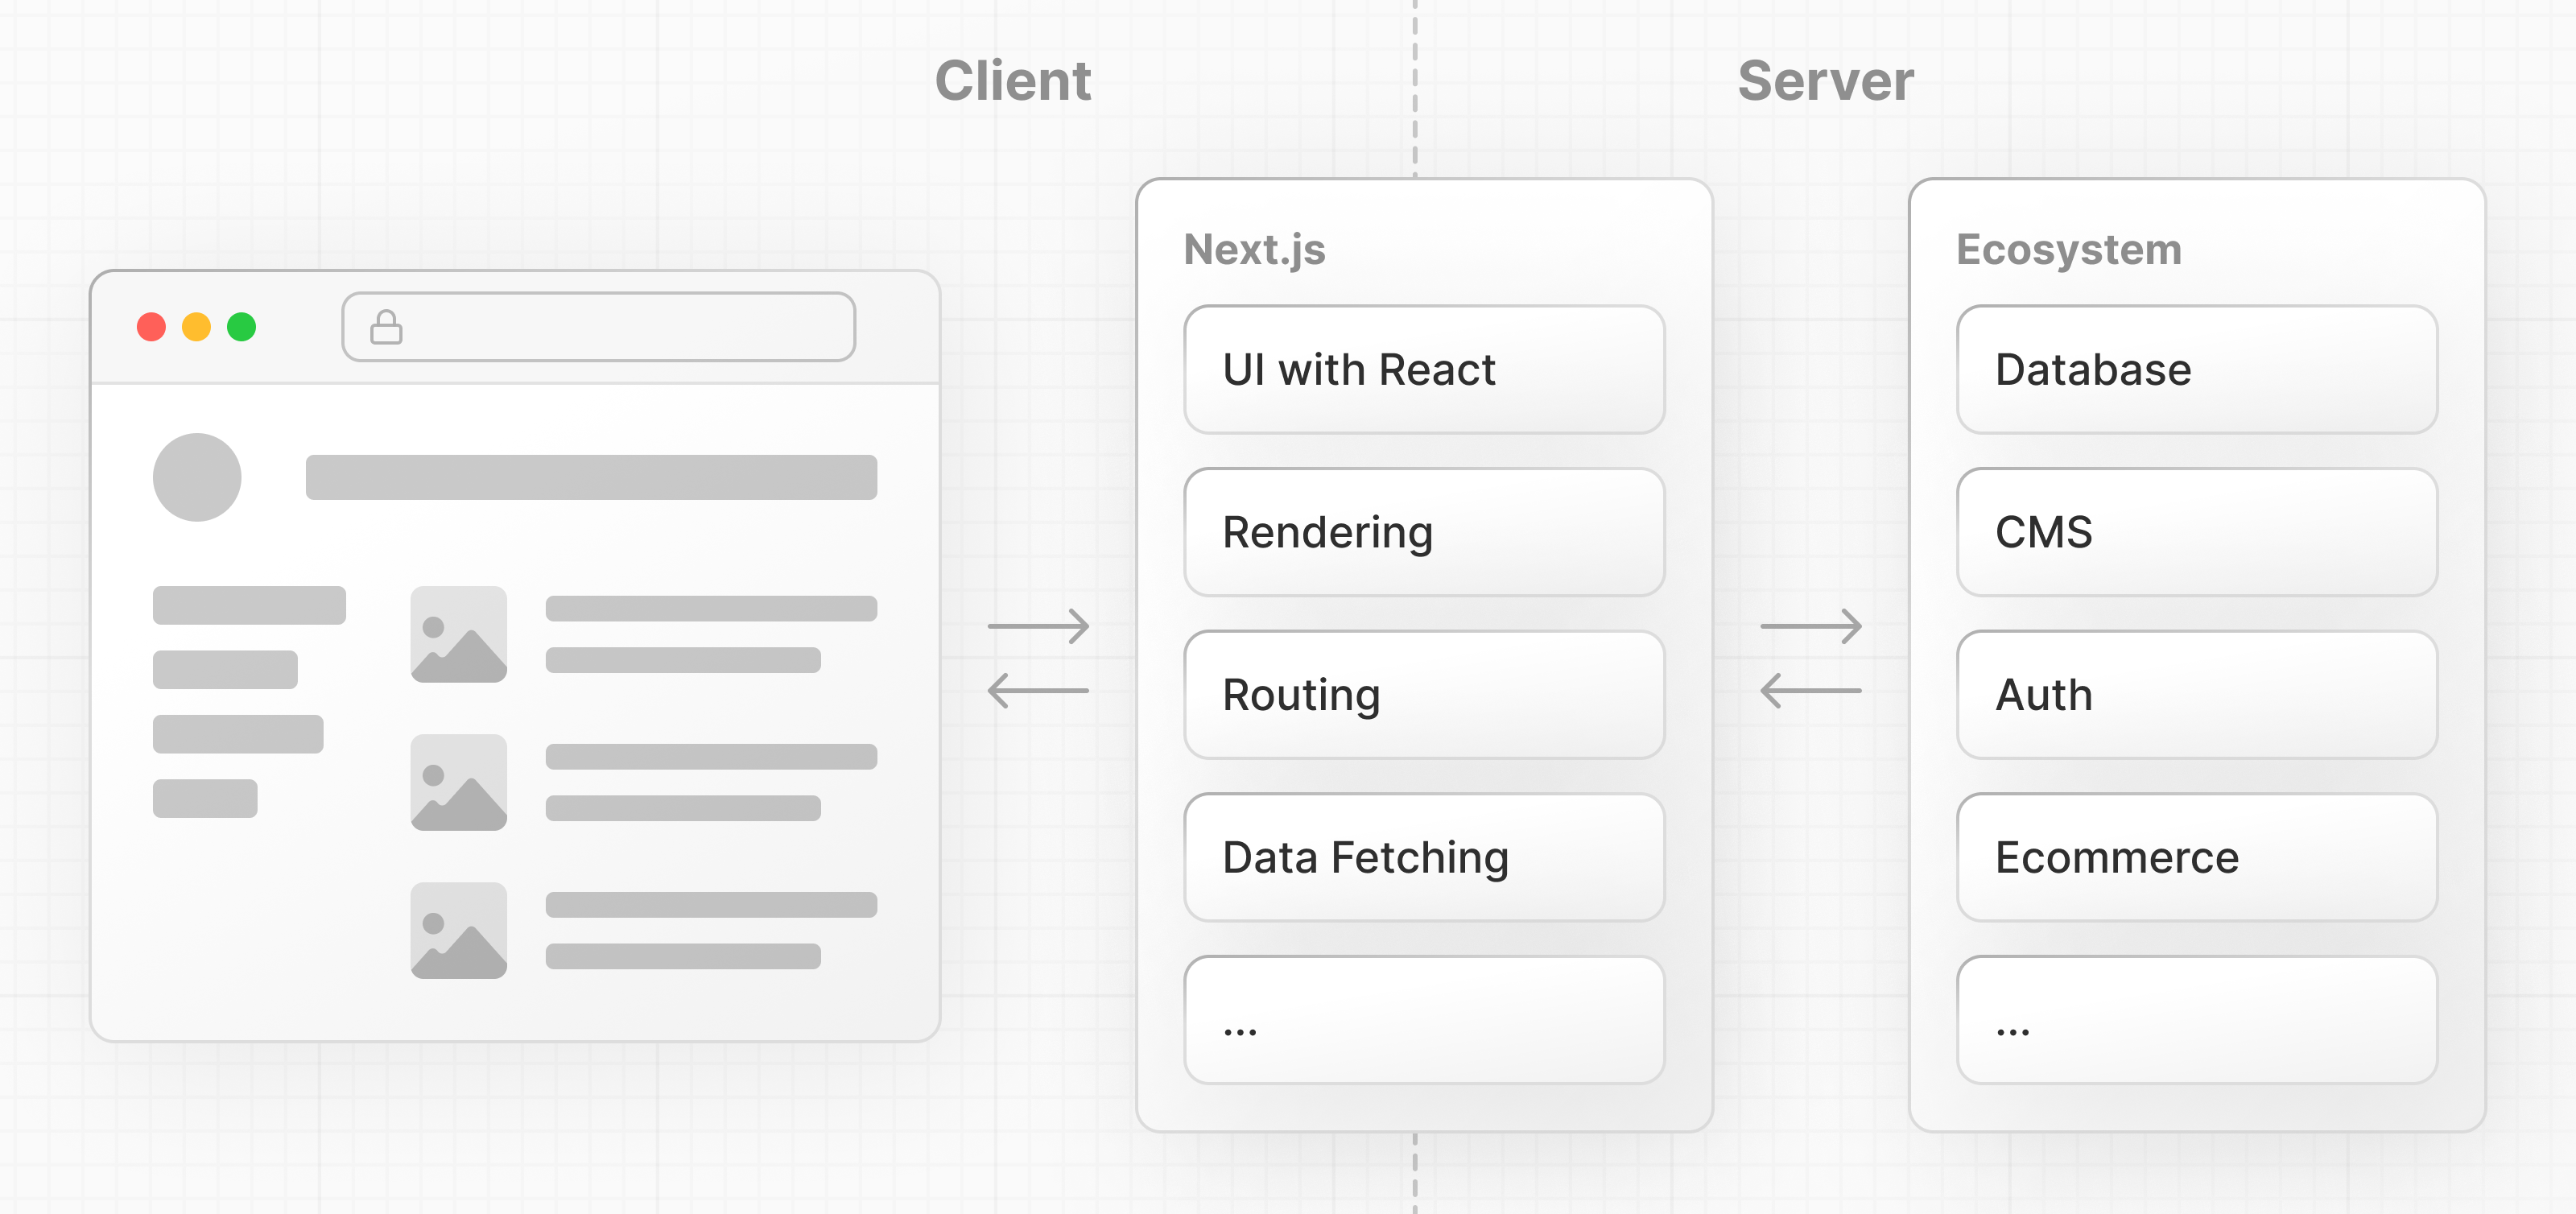 Diagram showing how Next.js spans the server and client, and provides additional features such as routing, data fetching, and rendering.